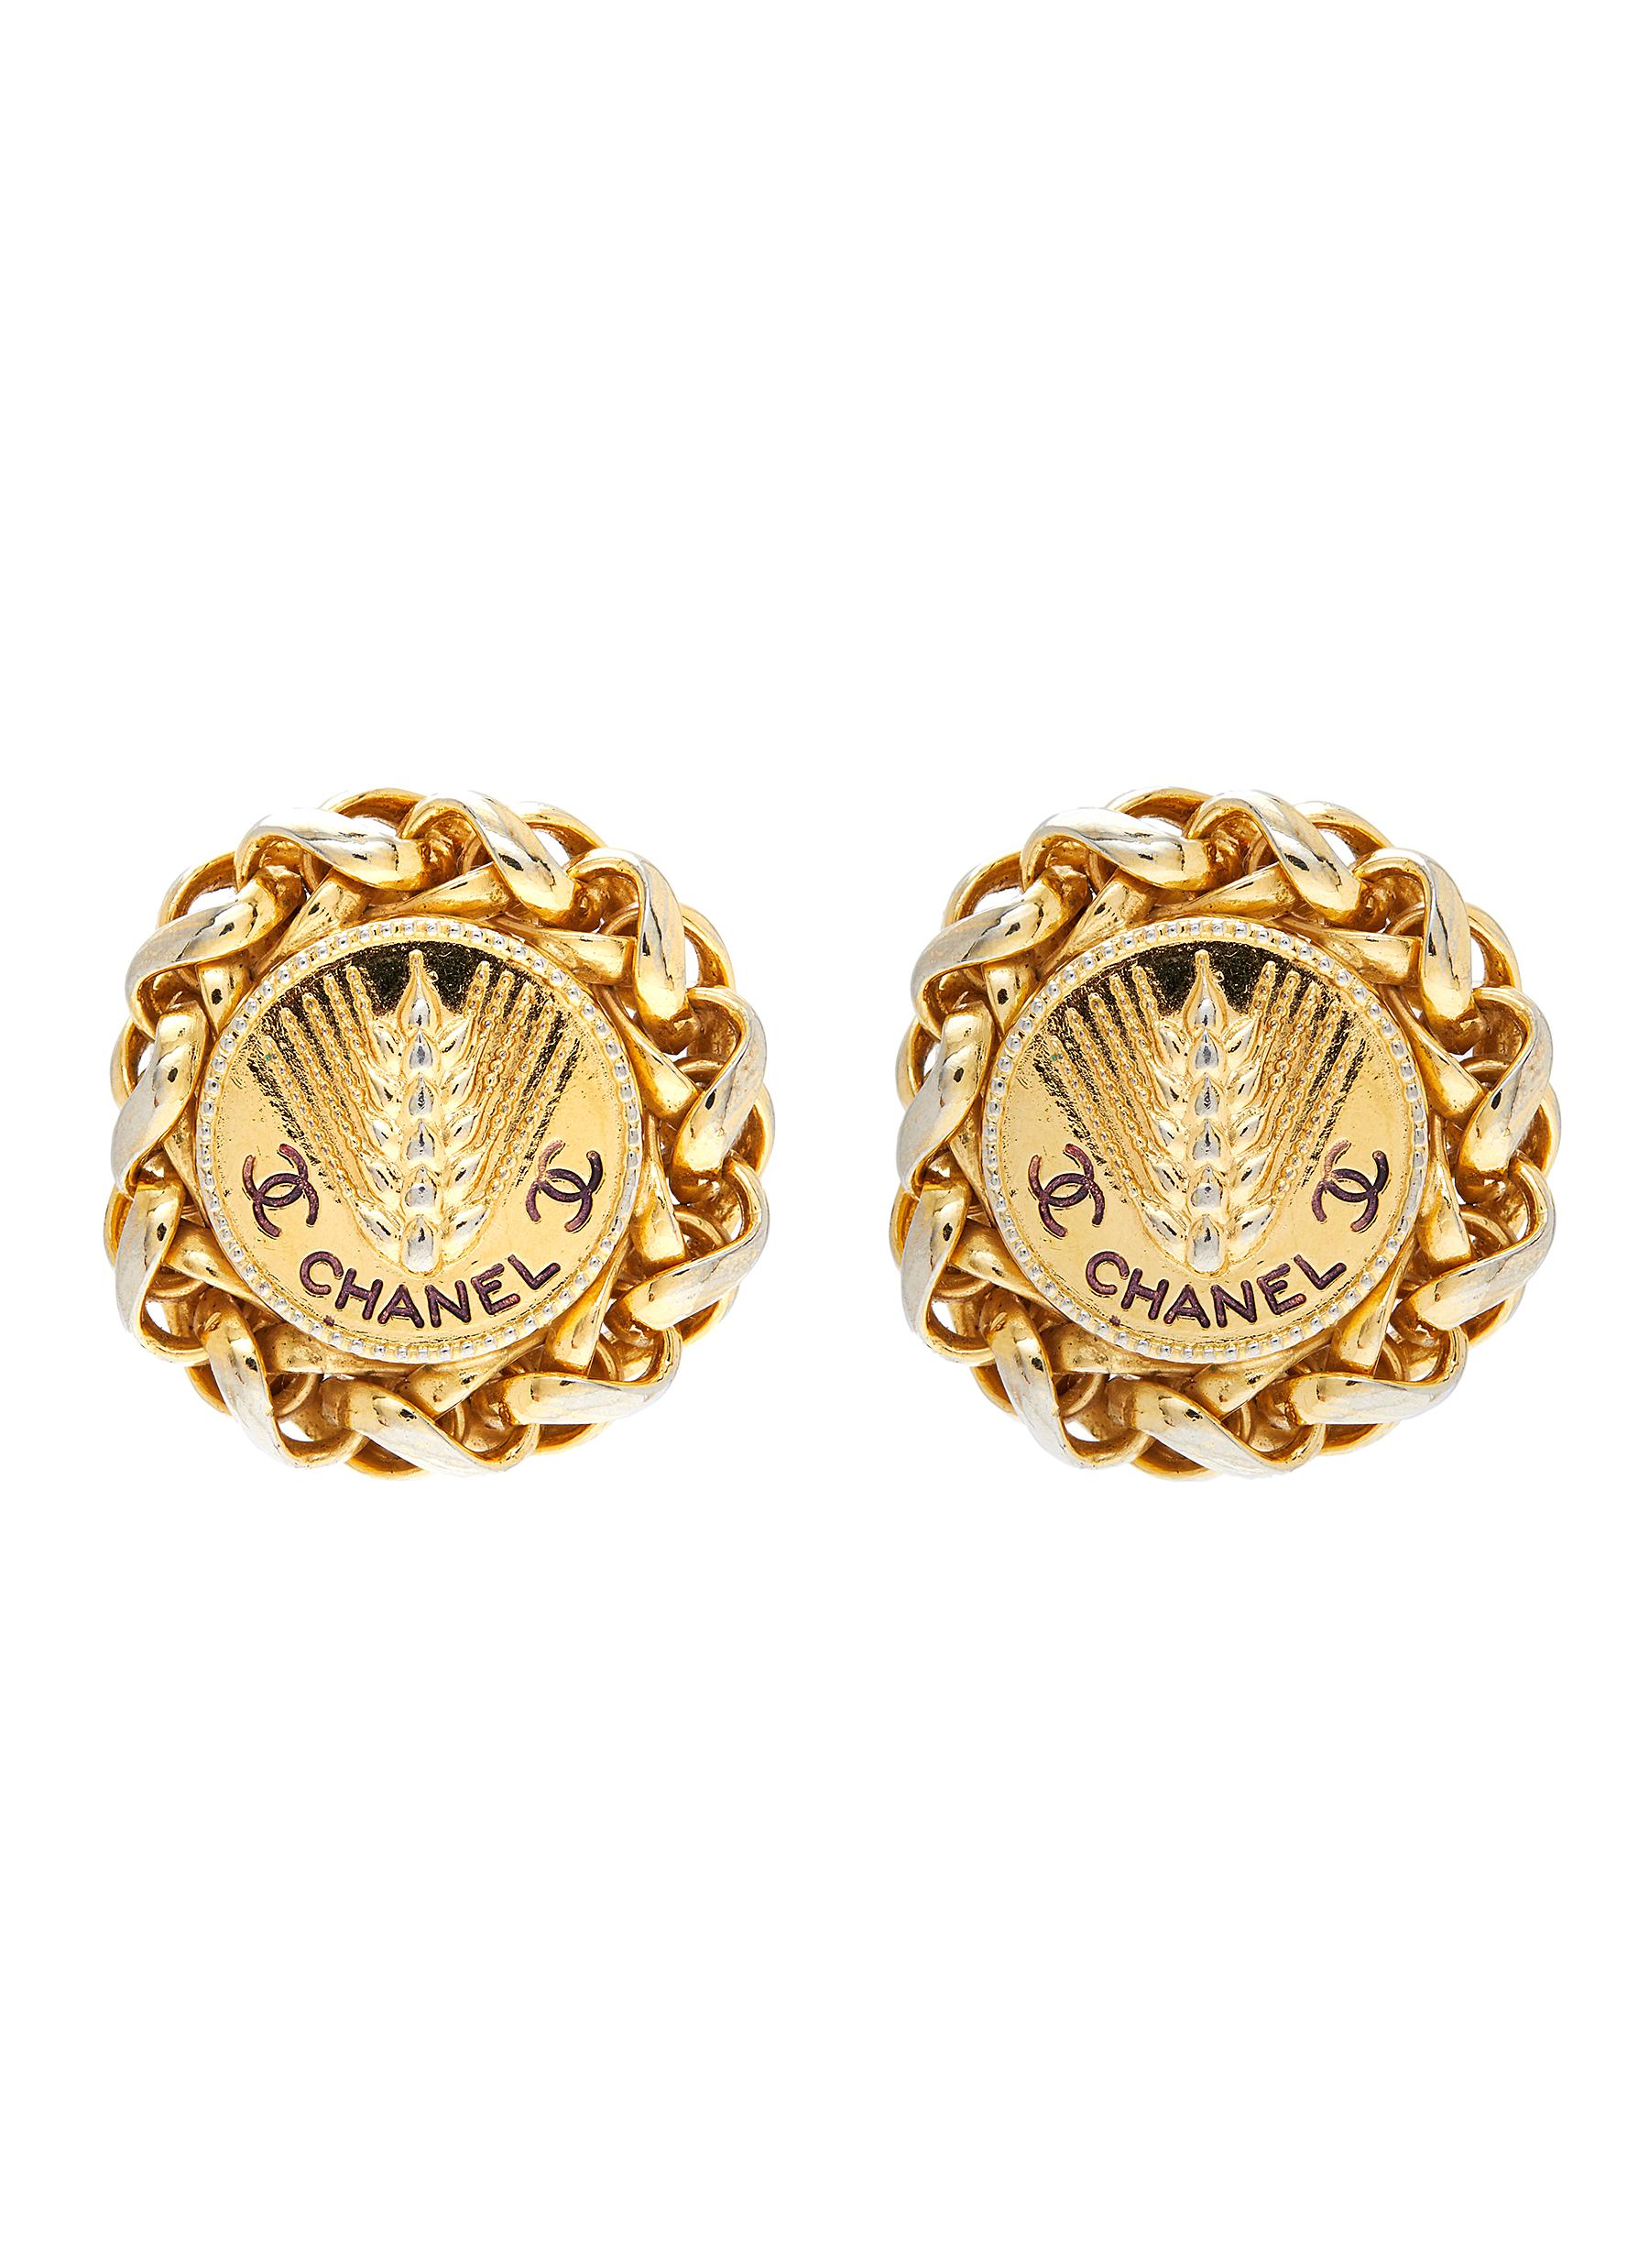 Make a Statement in Vintage Chanel Earrings  Handbags and Accessories   Sothebys